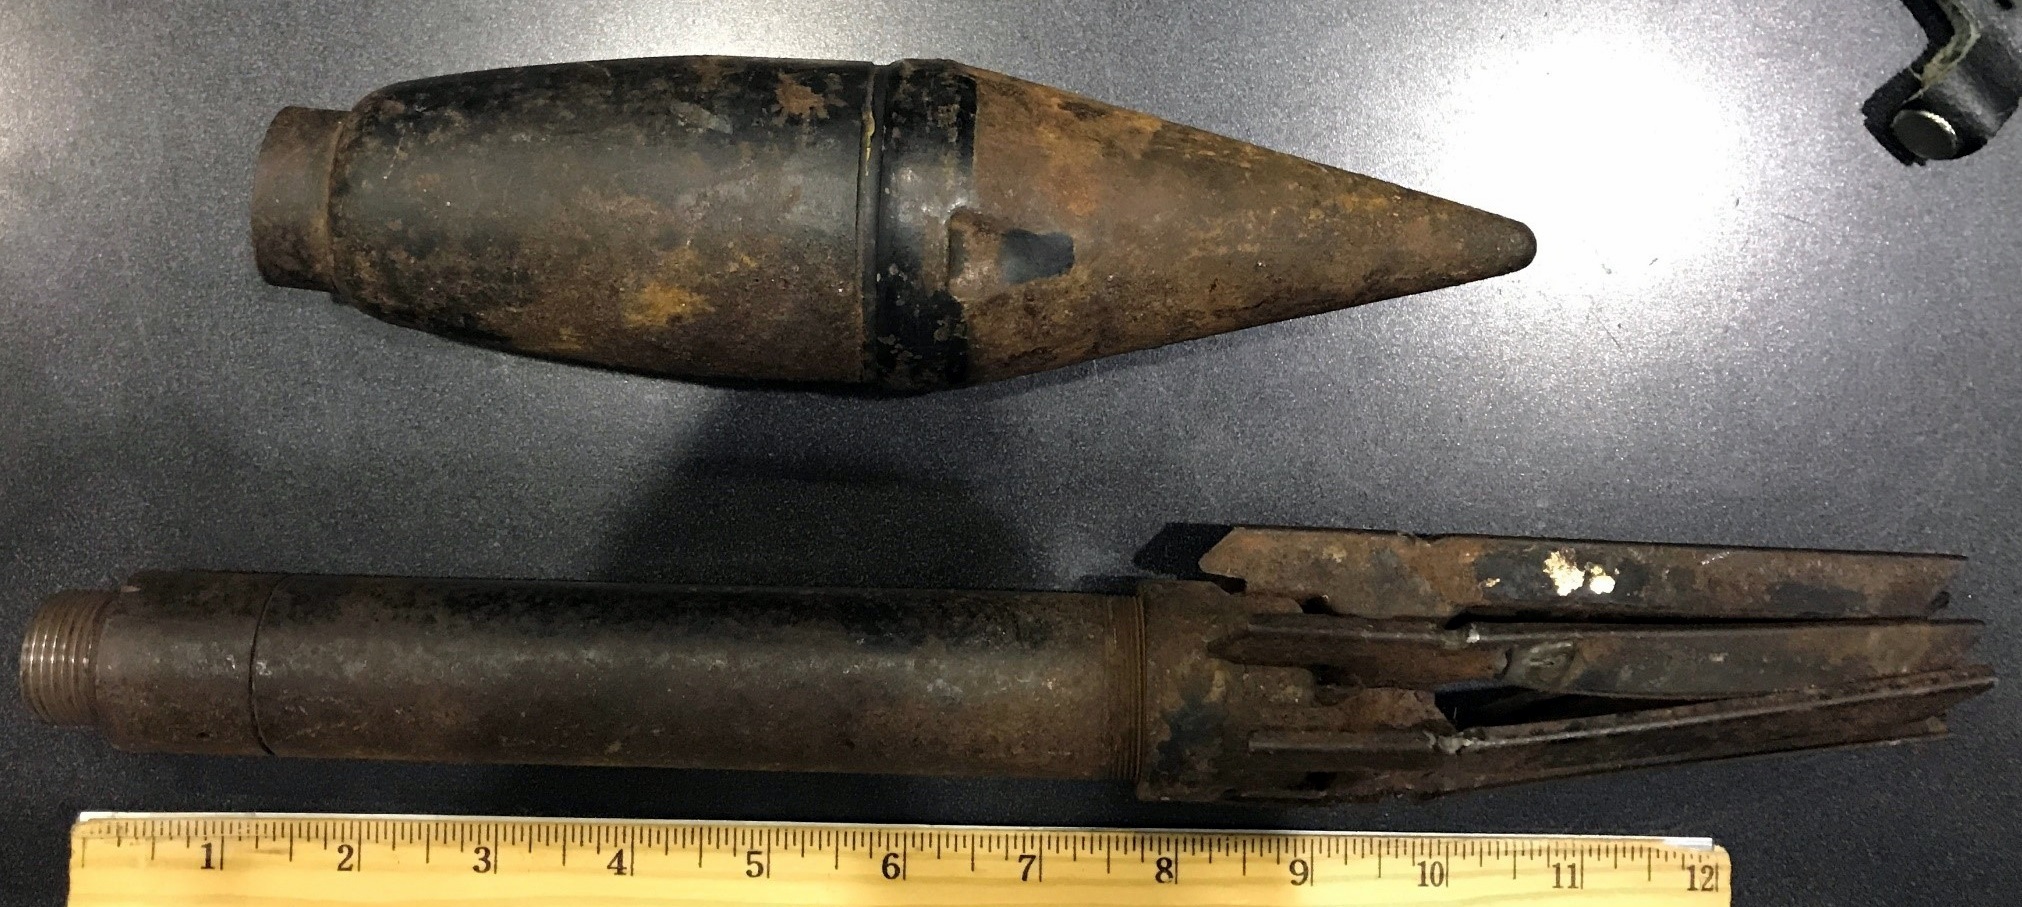 This inert 2.36 anti-tank rocket was discovered in a carry-0n bag at Tampa (TPA). 